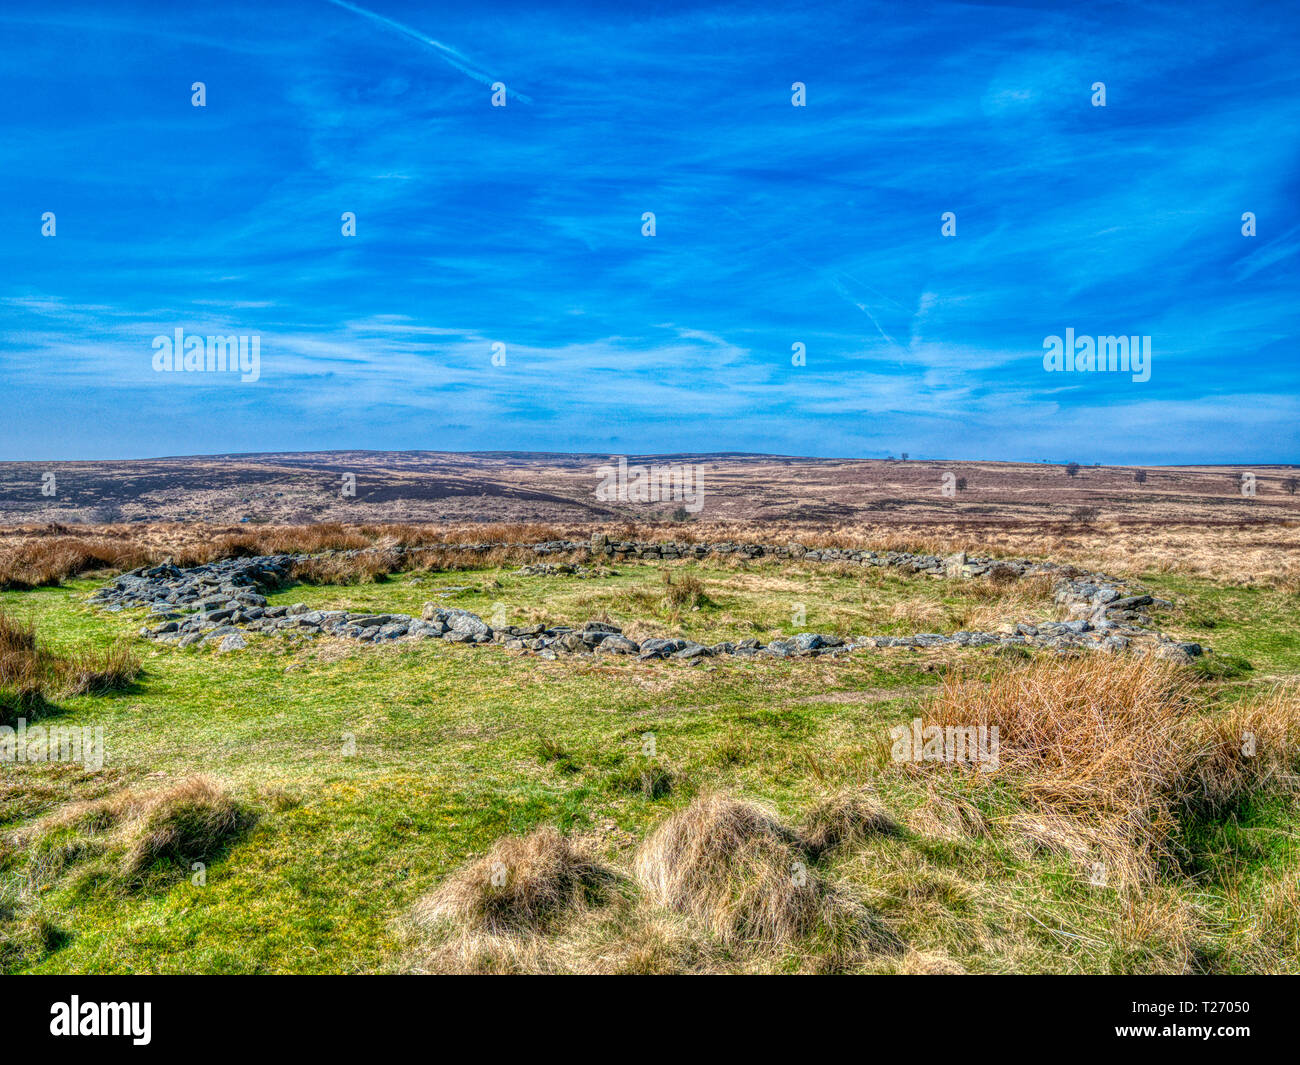 Barbrook, Derbyshire, UK. 30th March, 2019. UK Weather: Bright blue sky on a warm sunny day at Barbrook 2, stone circle altered incorporating a wall in the Peak District. HDR landscape photography. Credit: Doug Blane/Alamy Live News Stock Photo